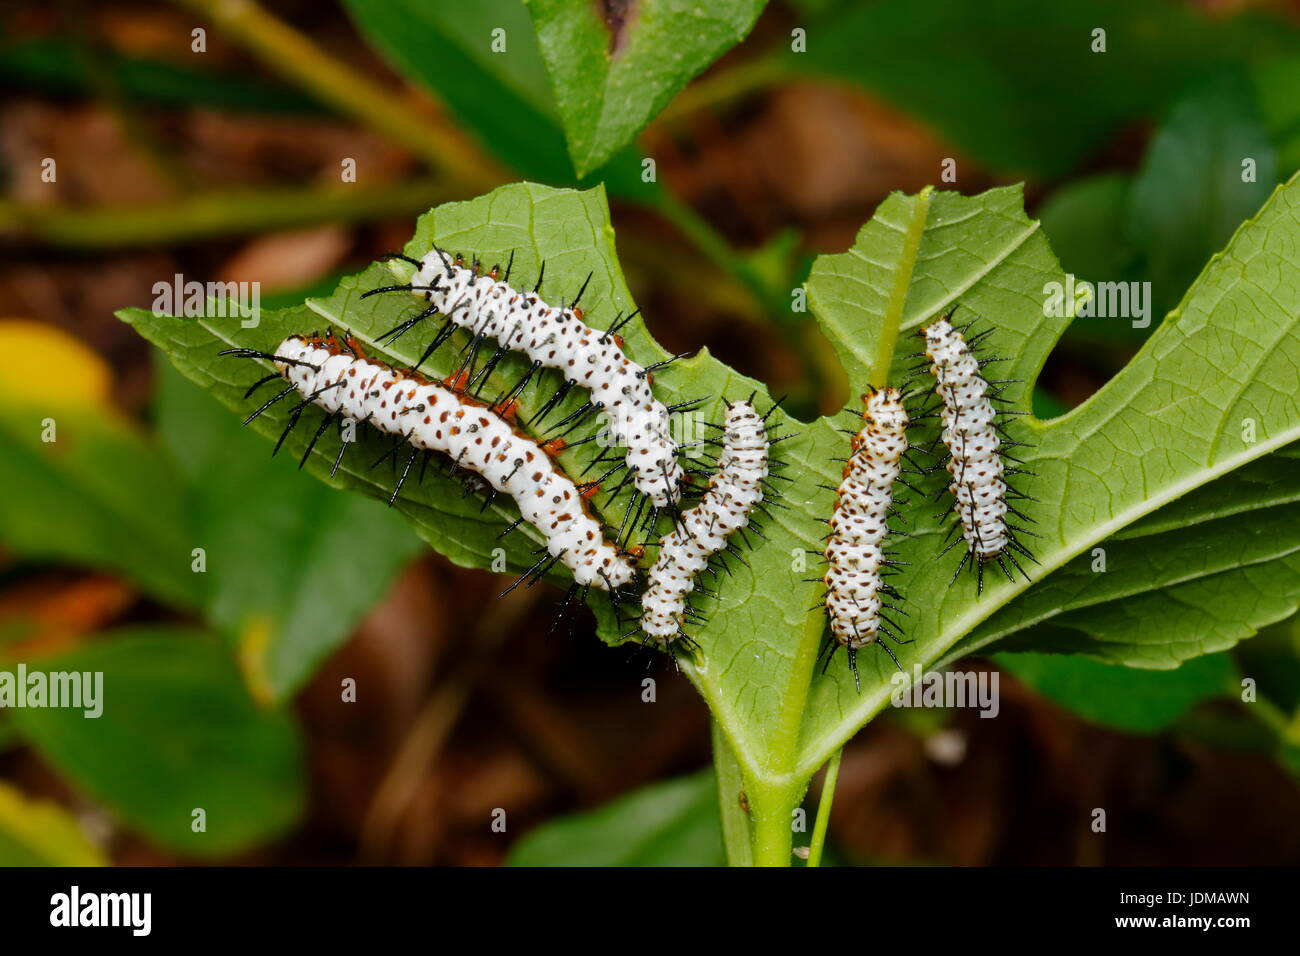 Zebra long-wing butterfly caterpillars, Heliconius charithonia. Stock Photo